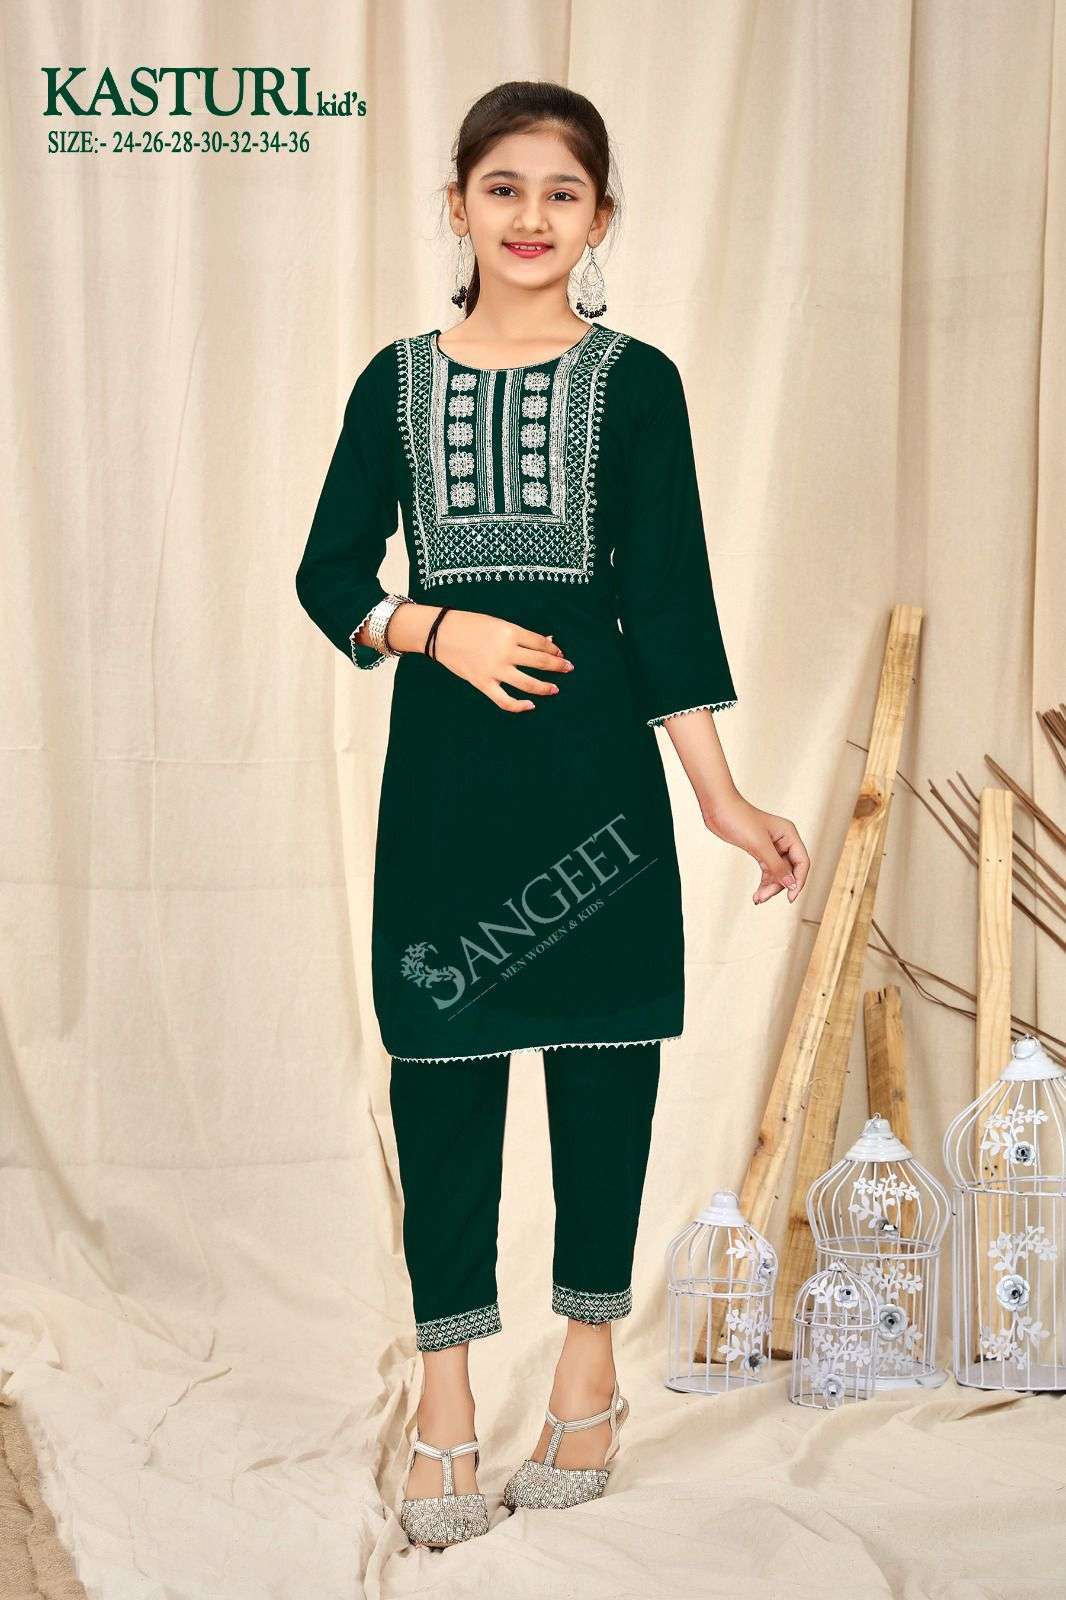 I wish to open a Kurtis business where can I buy wholesale Kurtis in India?